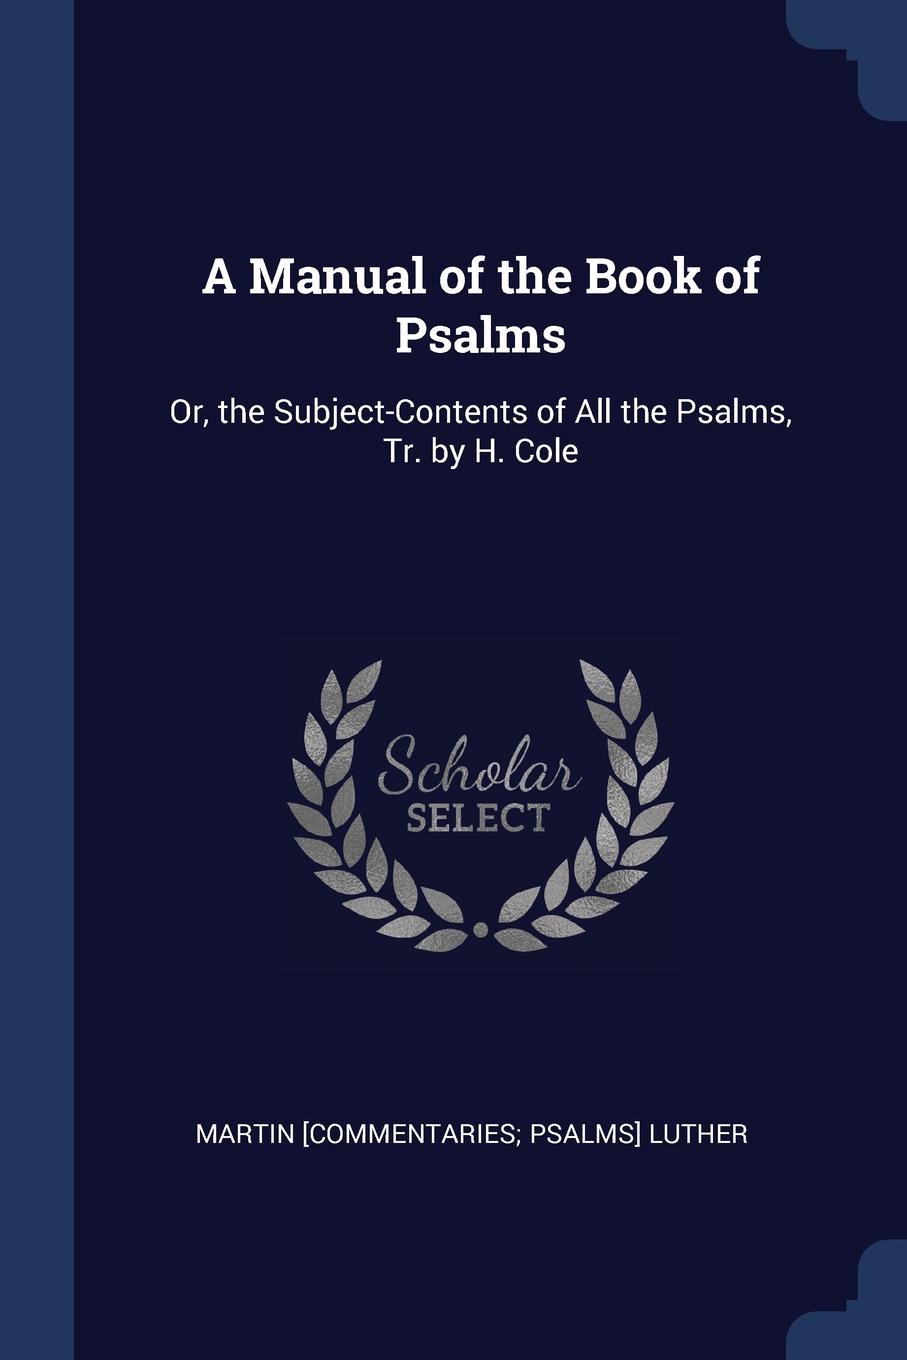 A Manual of the Book of Psalms. Or, the Subject-Contents of All the Psalms, Tr. by H. Cole